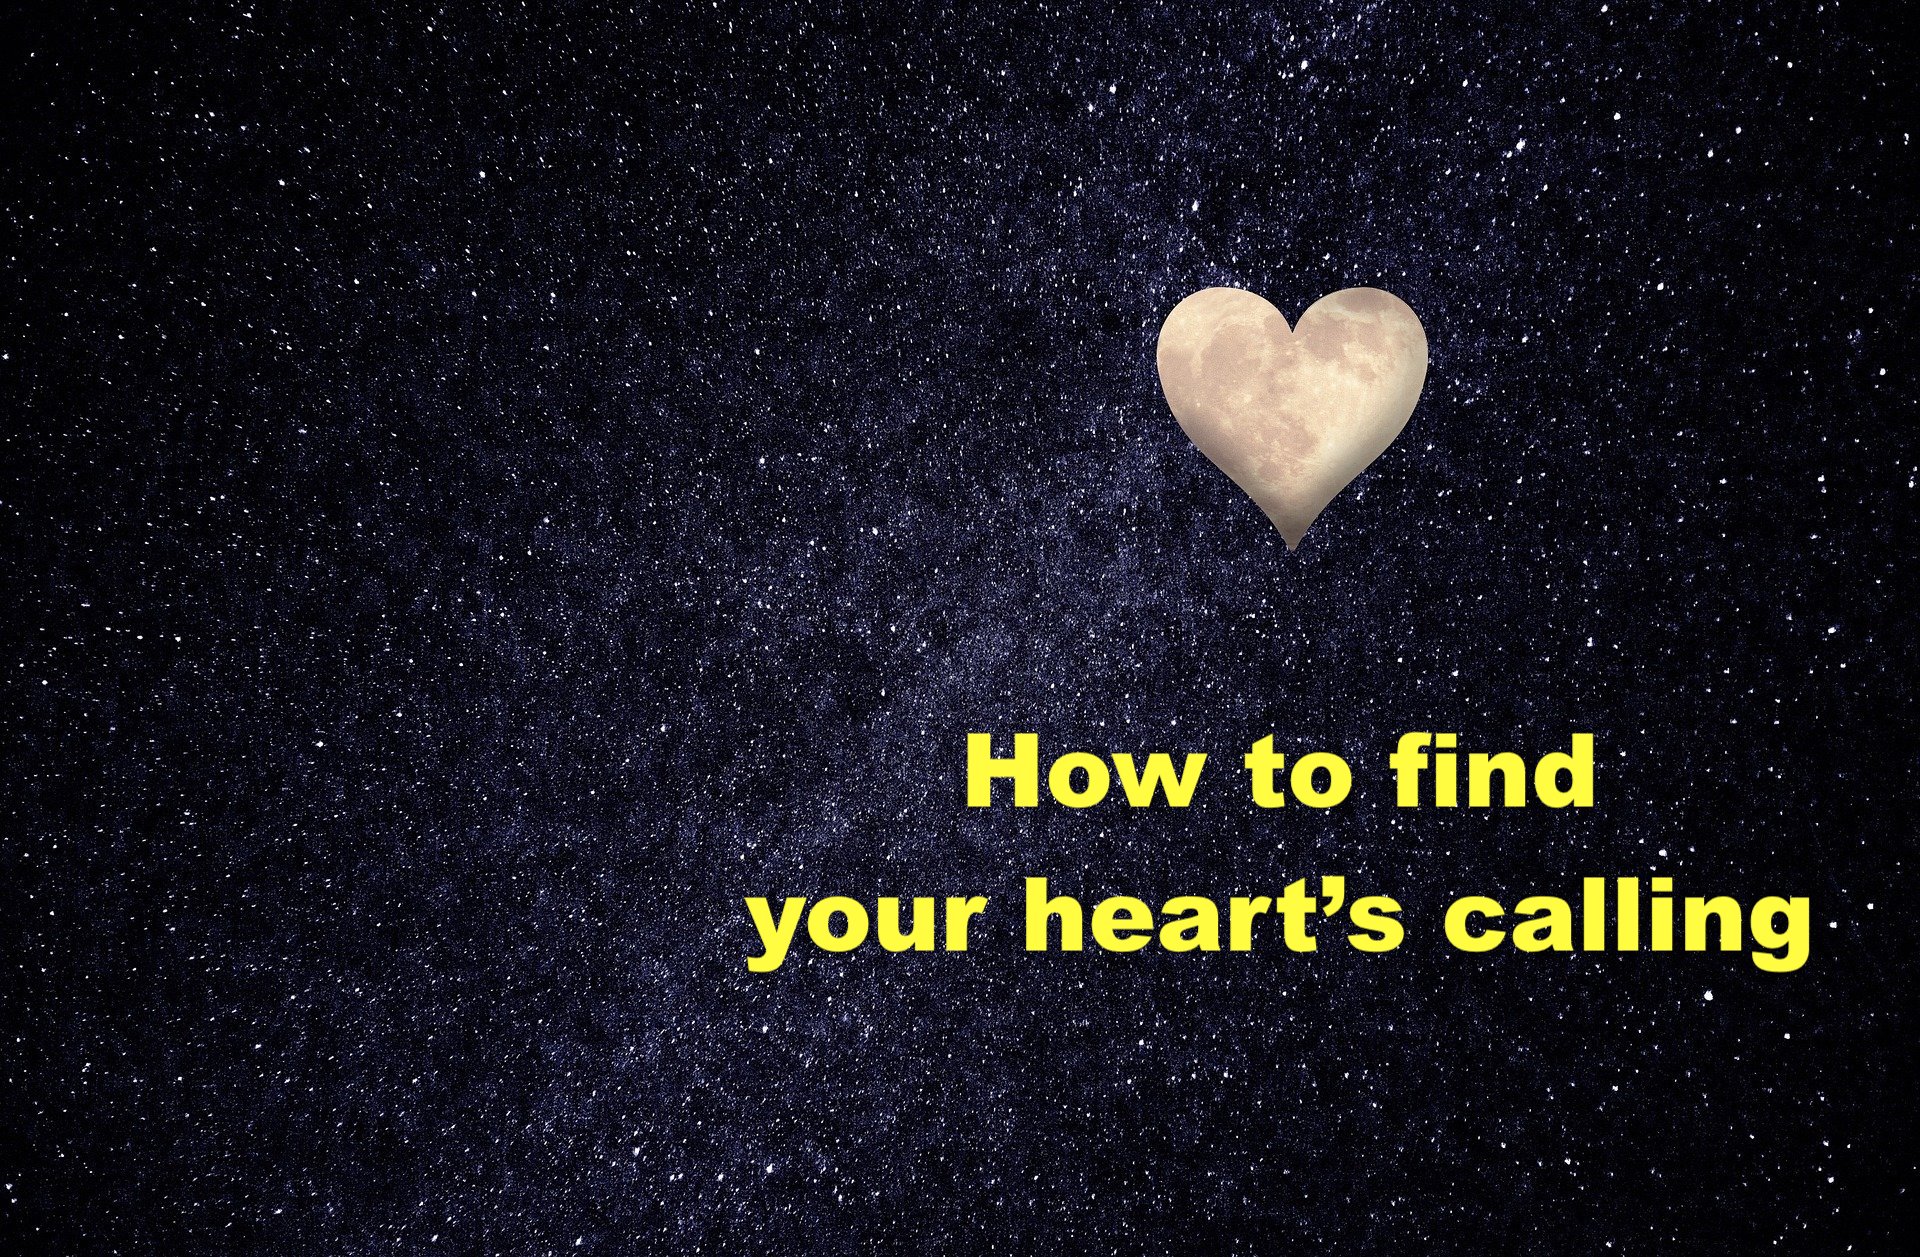 How to find our heart